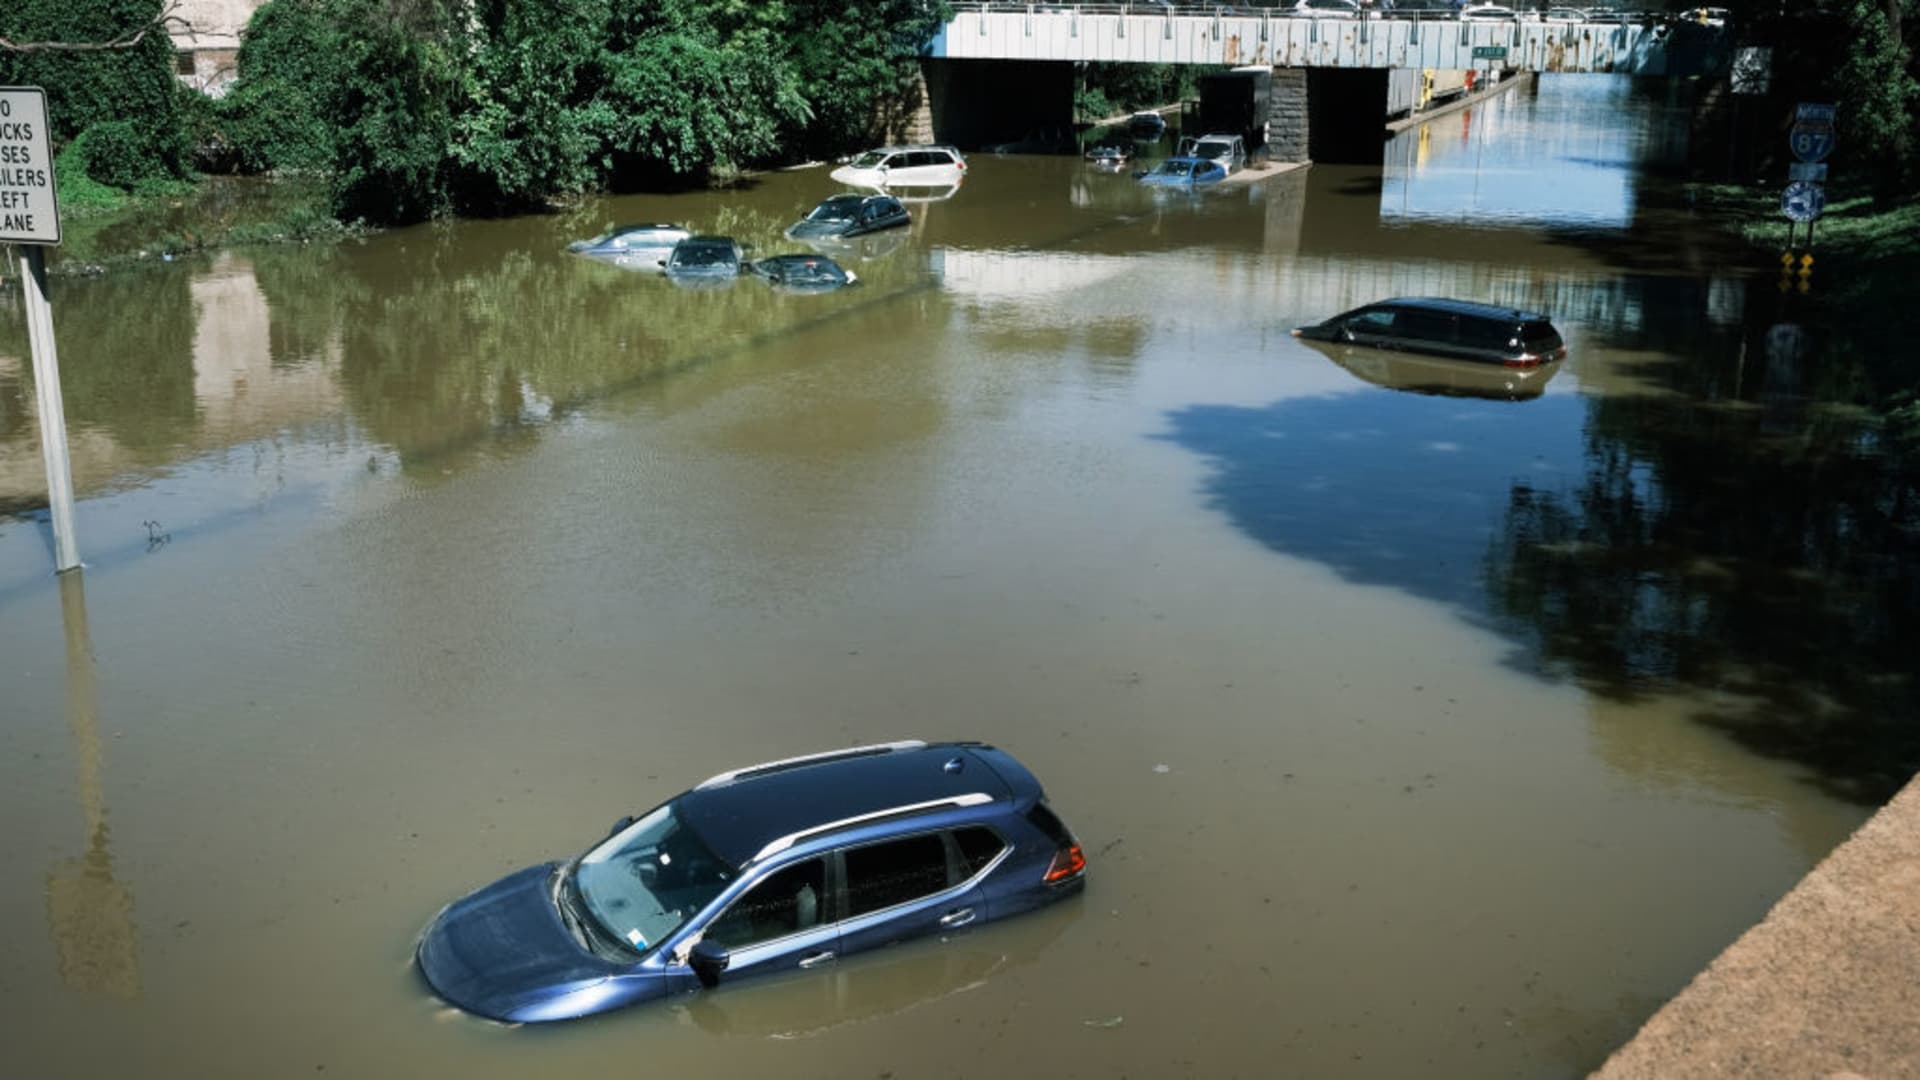 Cars sit abandoned on the flooded Major Deegan Expressway following a night of extremely heavy rain from the remnants of Hurricane Ida on September 2, 2021 in the Bronx borough of New York City.